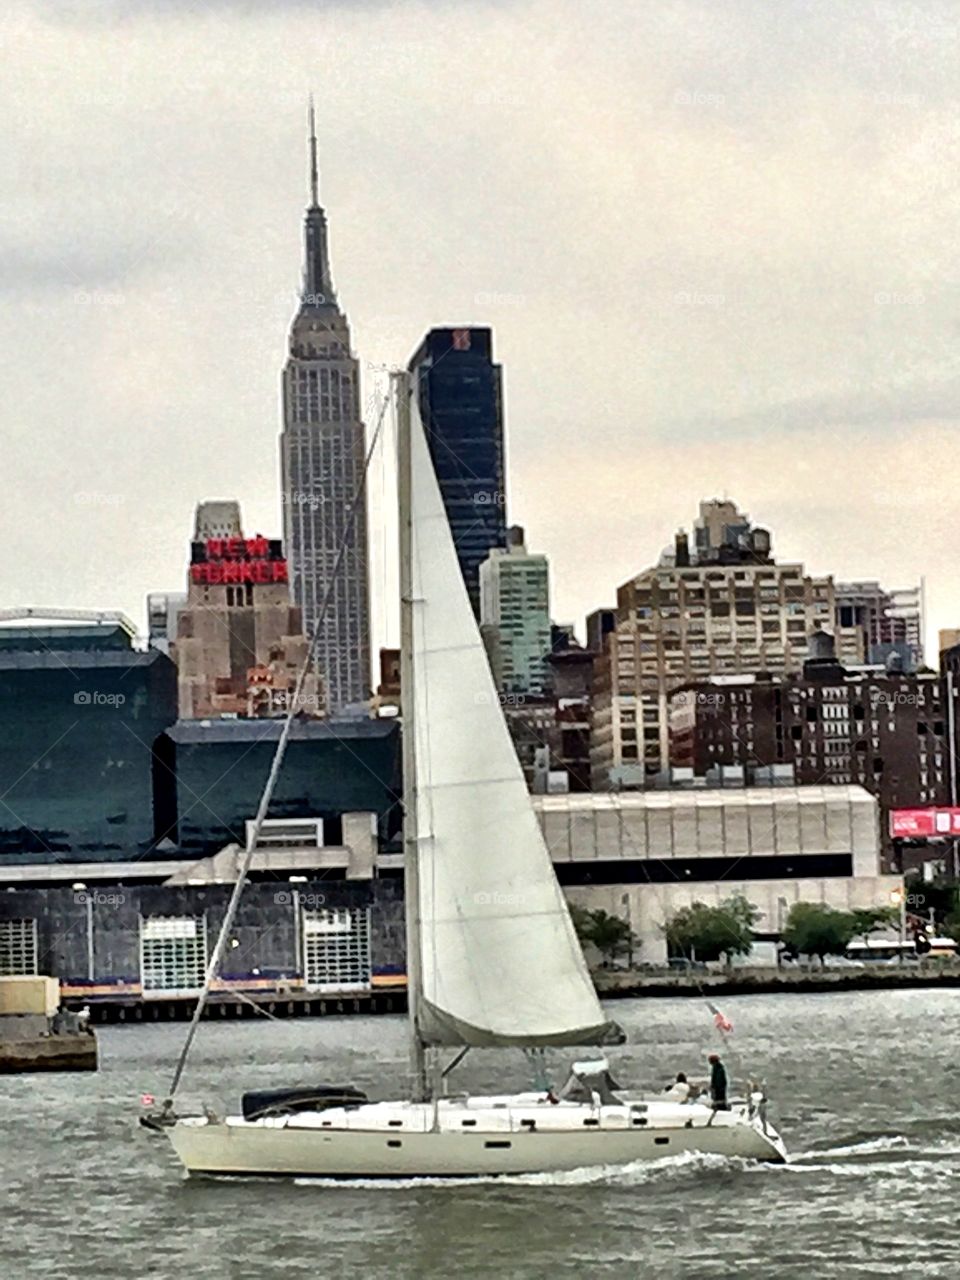 Sailing on the Hudson River, New York City . Sailing on the Hudson River, New York City. Empire State Building in the background